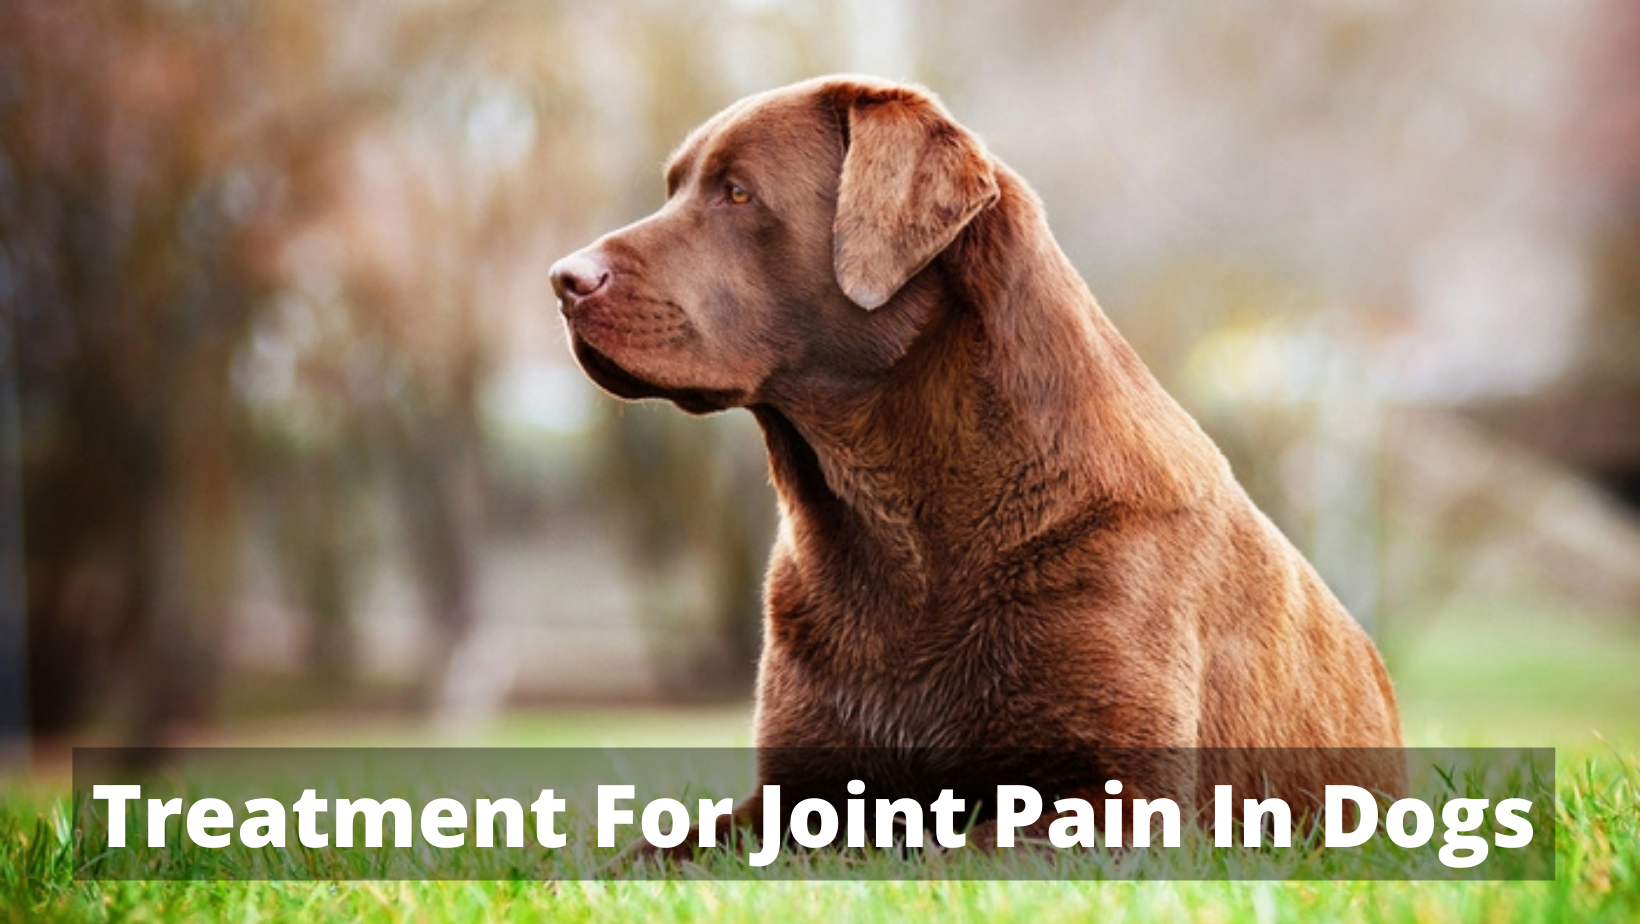 Treatment For Joint Pain In Dogs